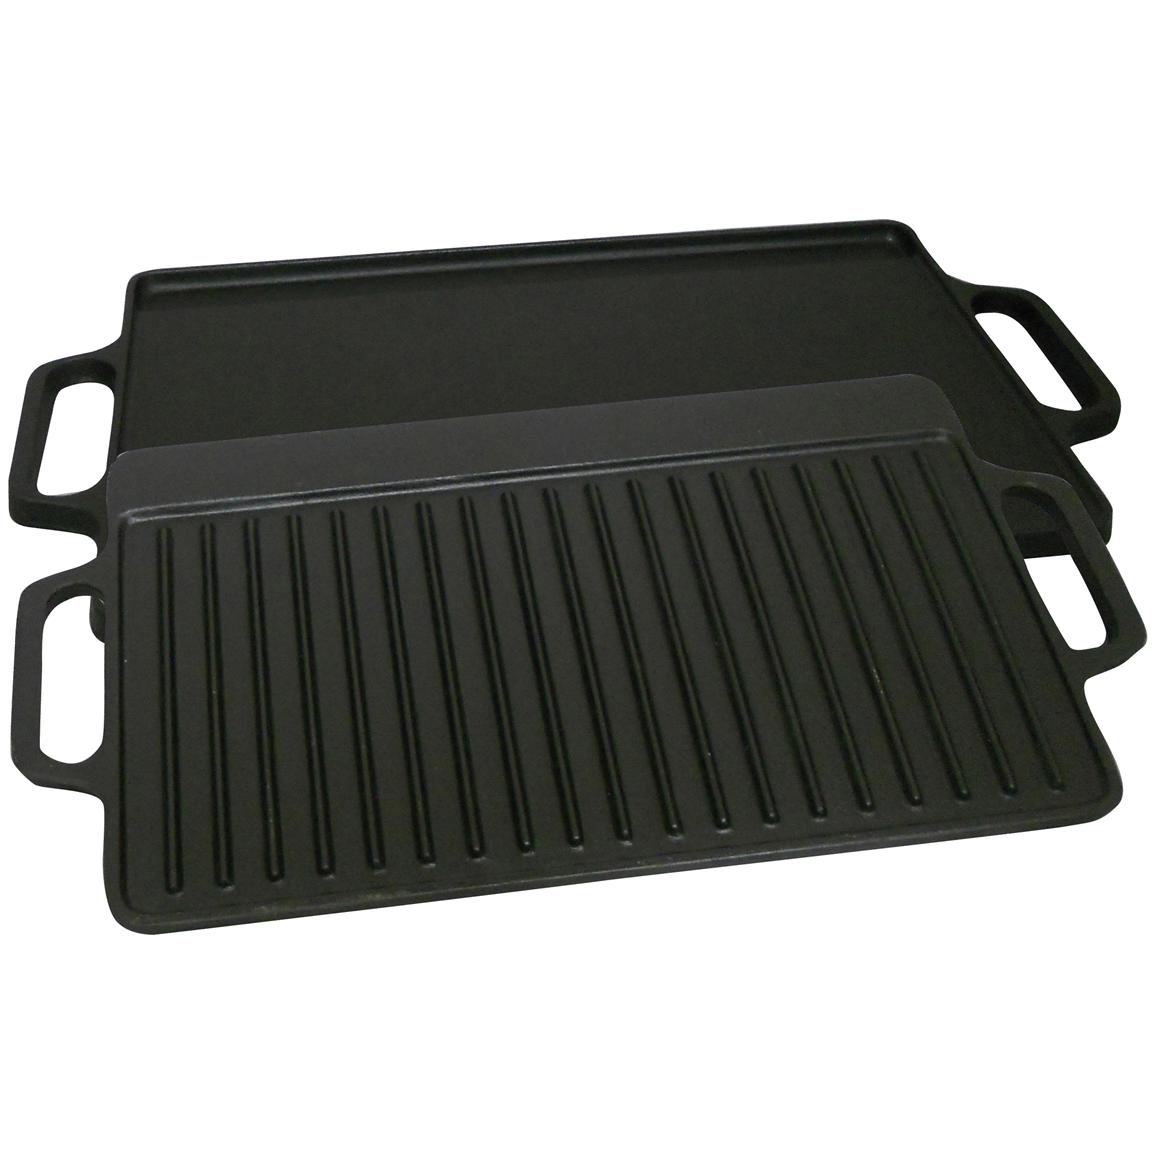 King Kooker 14x28" Cast Iron Two-Sided Griddle